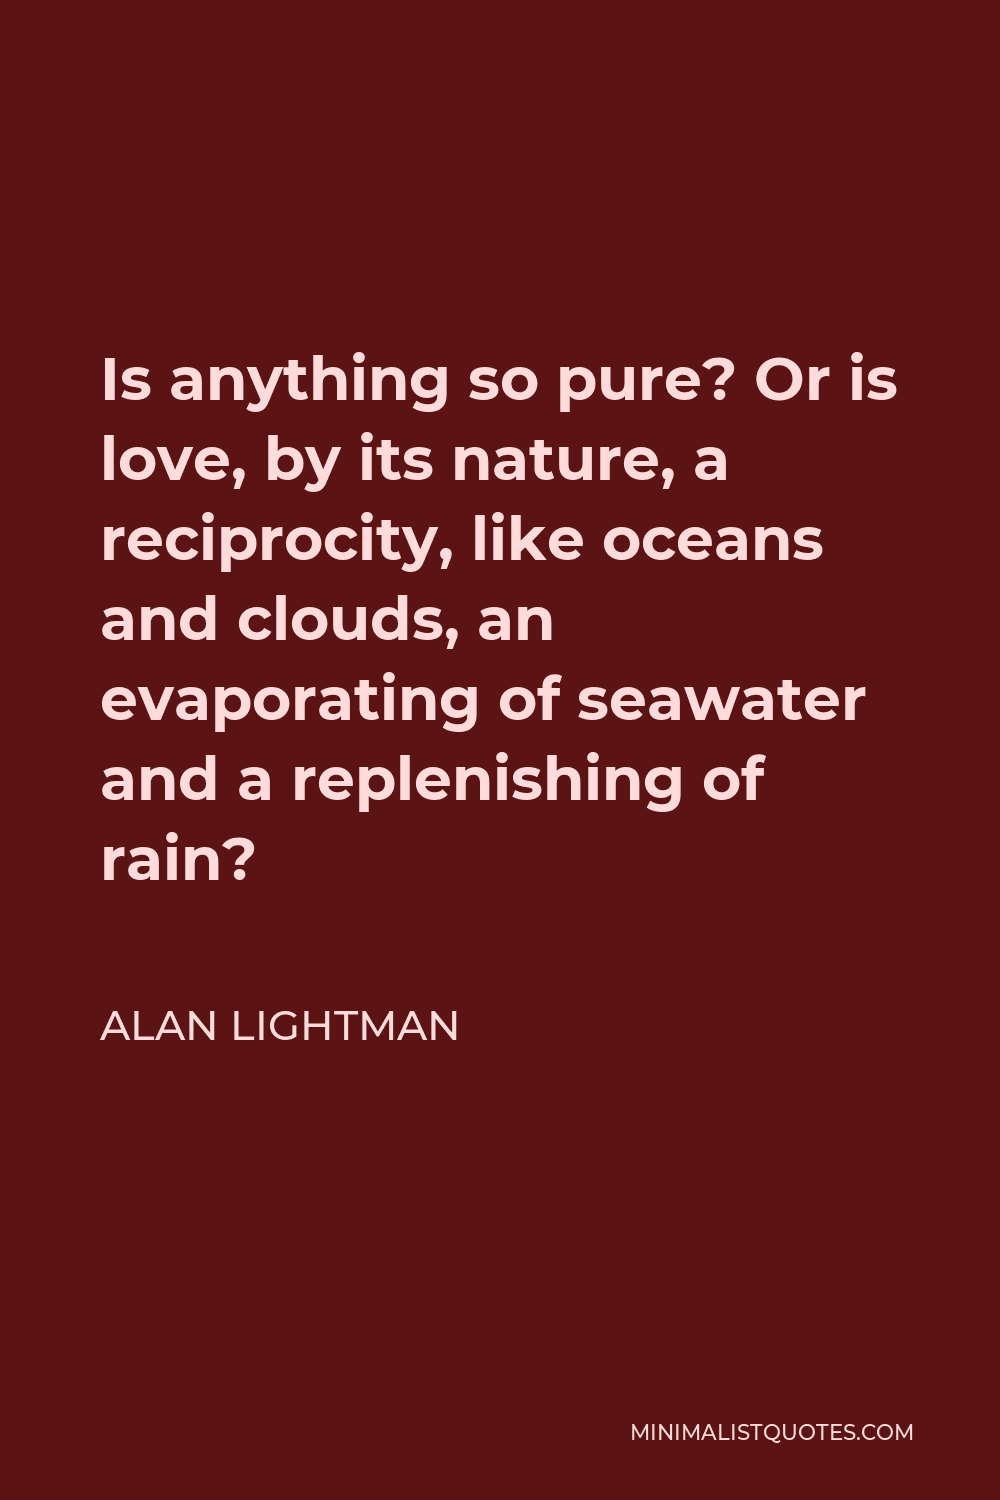 Alan Lightman Quote - Is anything so pure? Or is love, by its nature, a reciprocity, like oceans and clouds, an evaporating of seawater and a replenishing of rain?